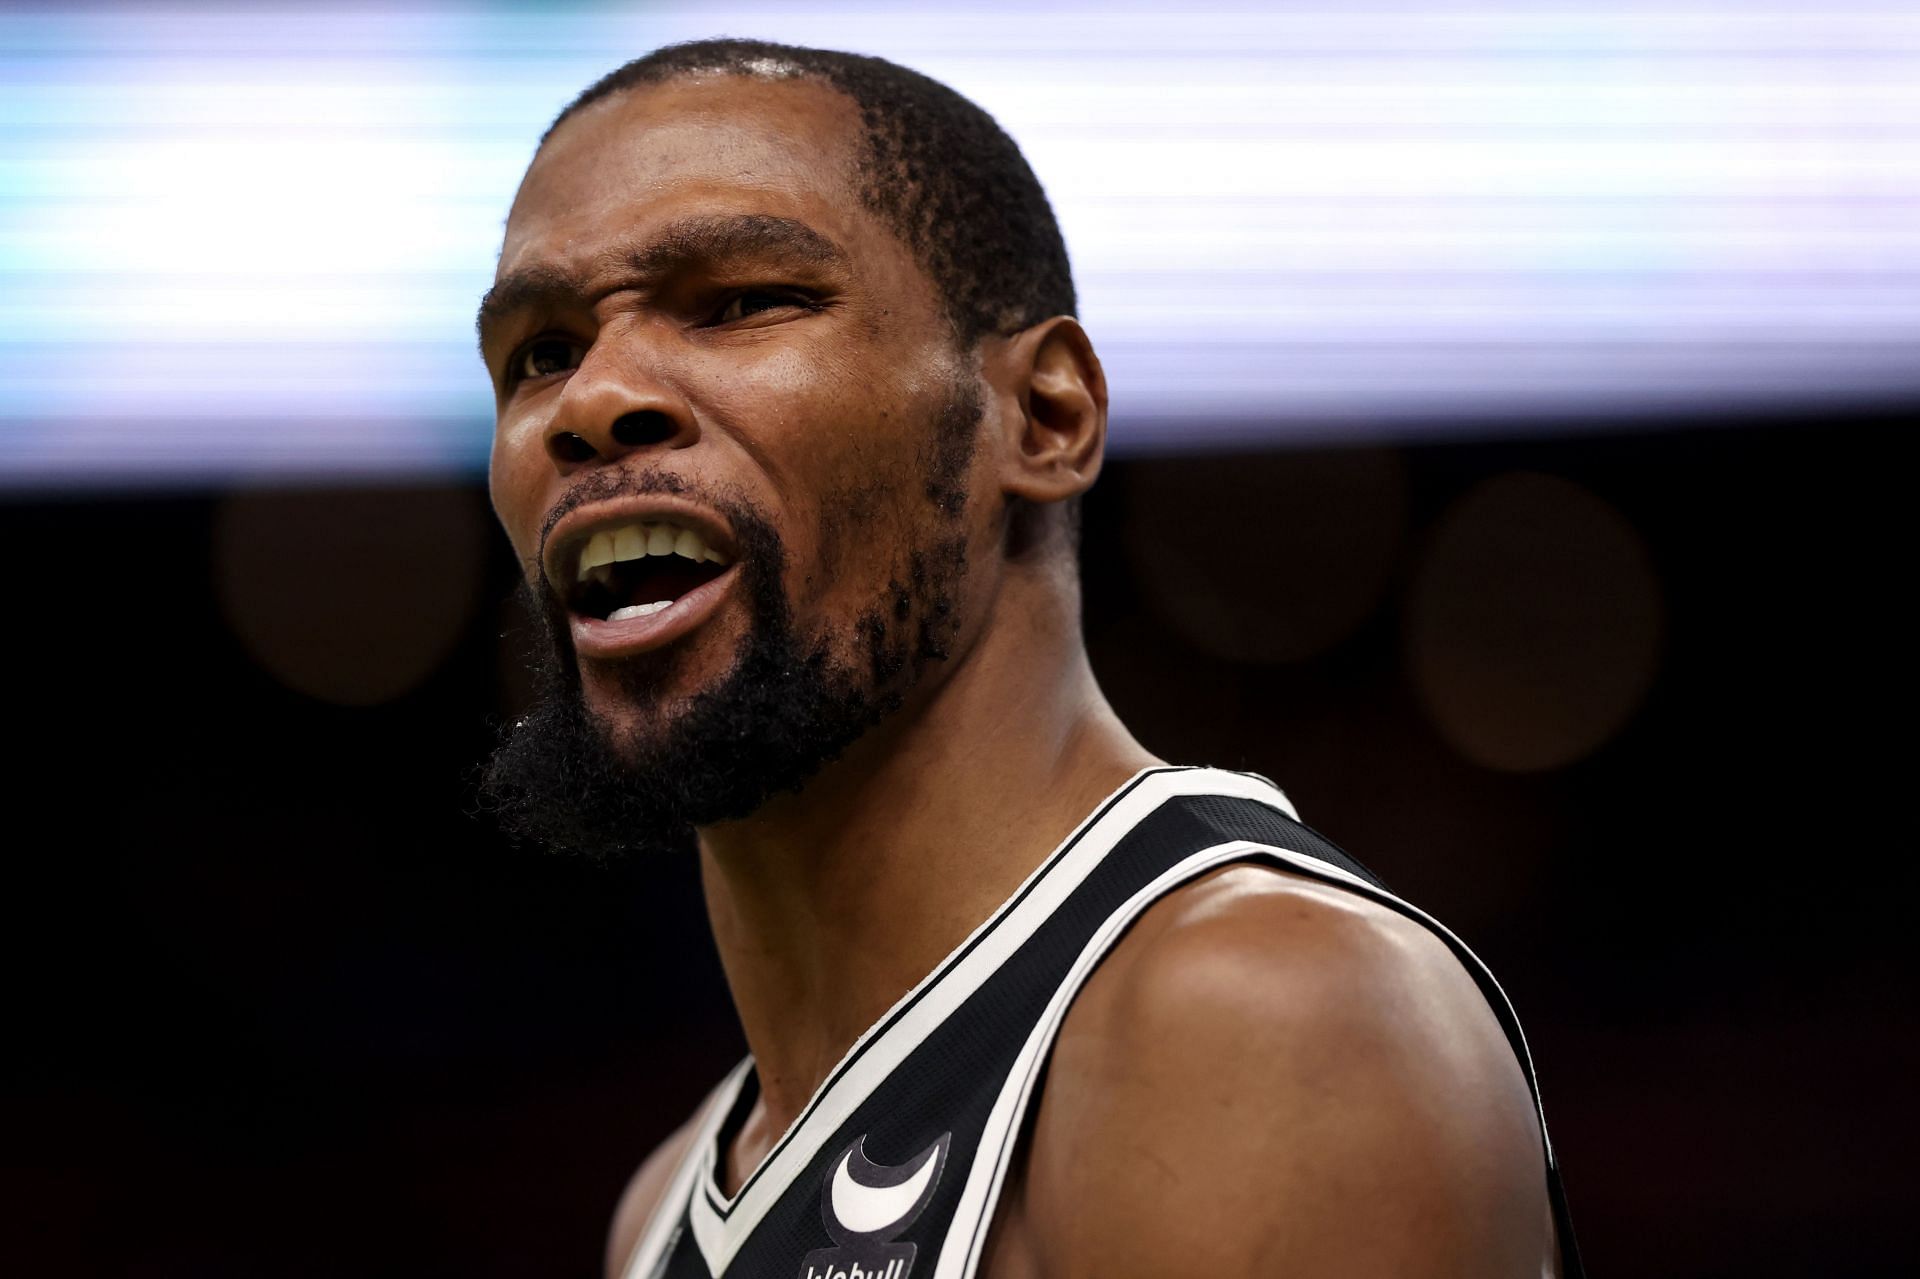 Kevin Durant #7 of the Brooklyn Nets disputes a call during the second quarter of Game Two of the Eastern Conference First Round NBA Playoffs against the Boston Celtics at TD Garden on April 20, 2022 in Boston, Massachusetts.